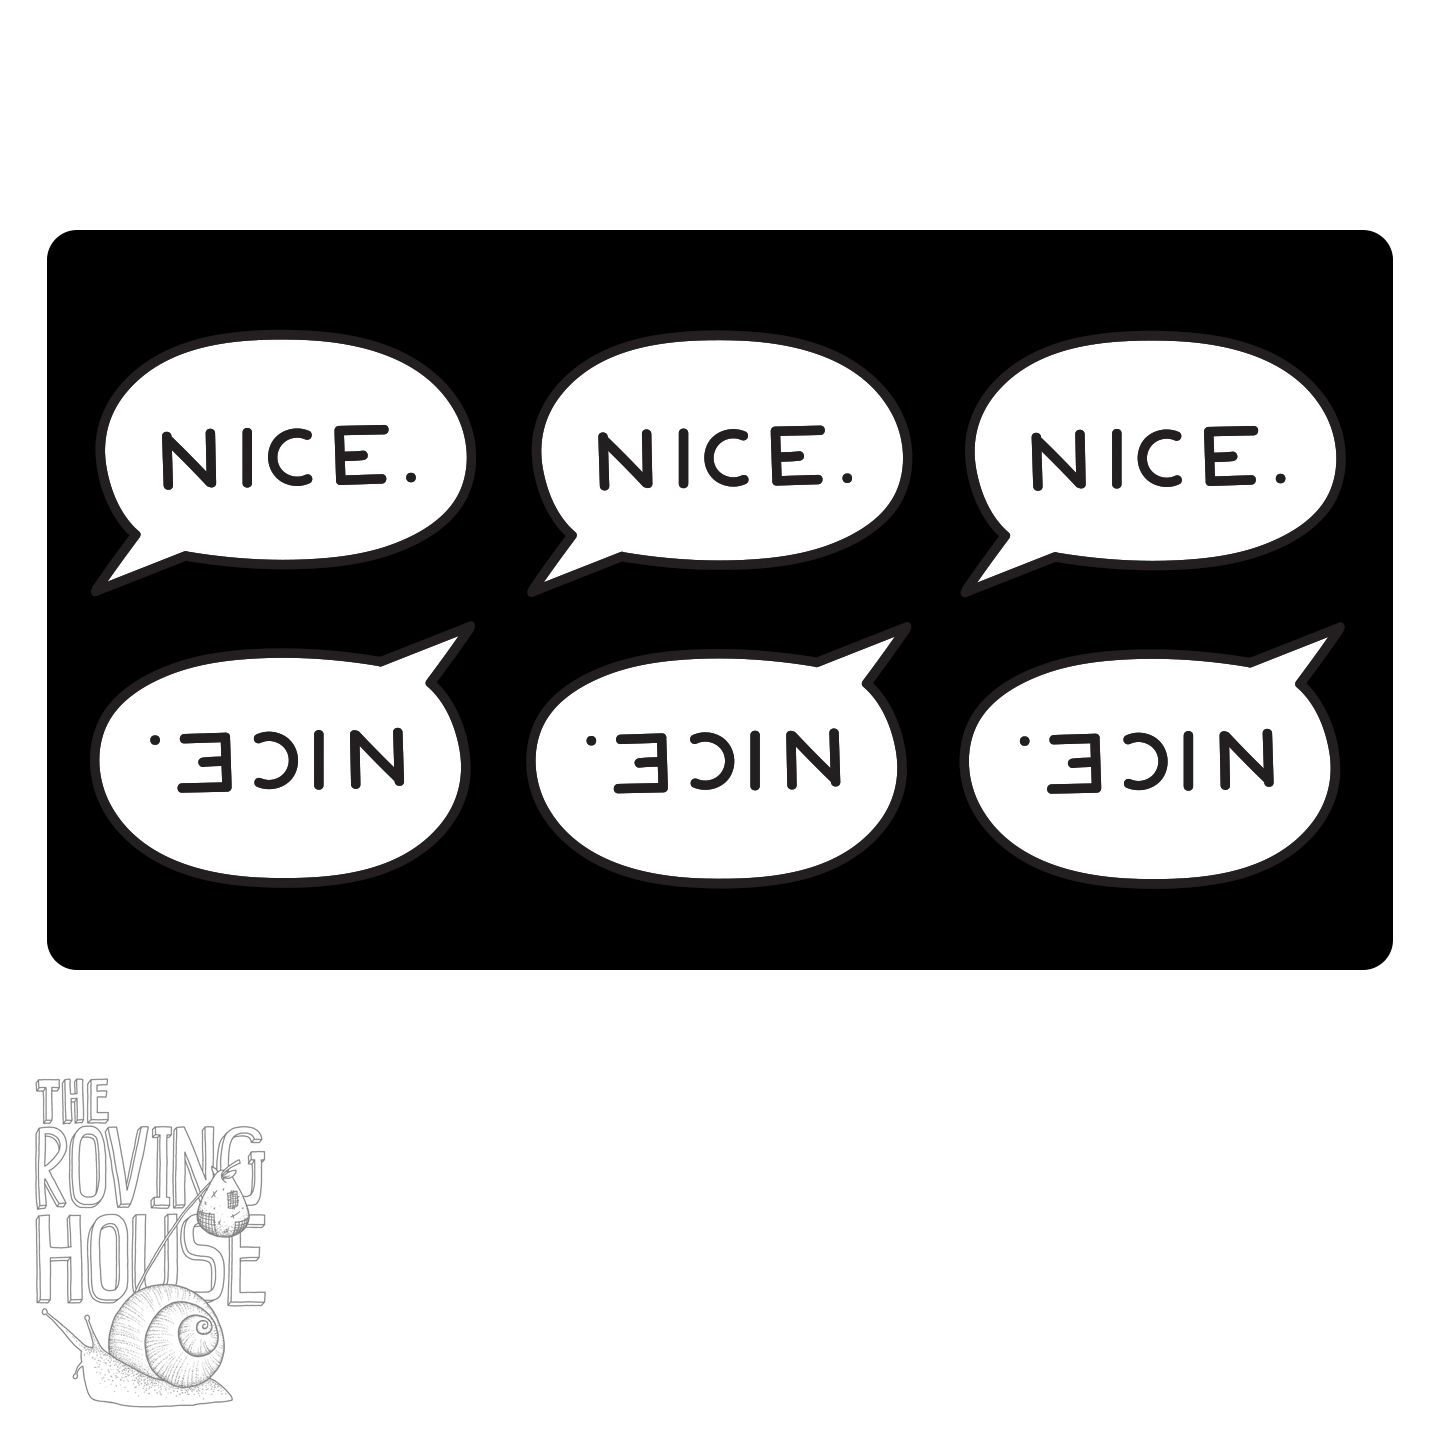 A small black and white sticker sheet of 6 talk bubbles that say "NICE."